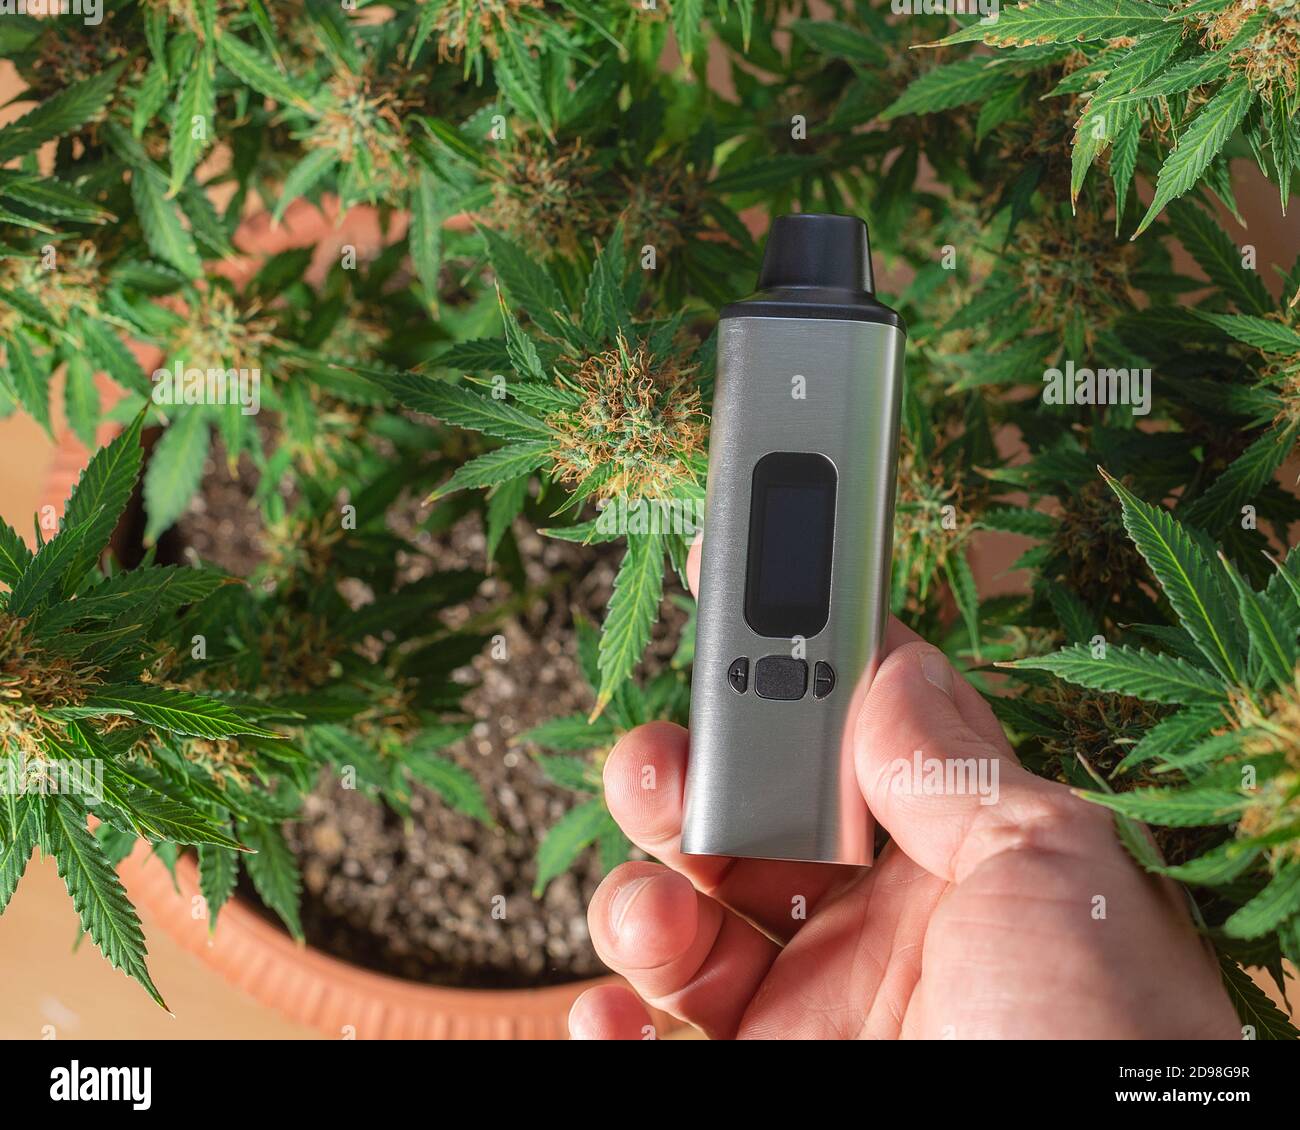 portable electronic vaporizer for smoking dry herbs in hand against the background of a bush of marijuana Stock Photo